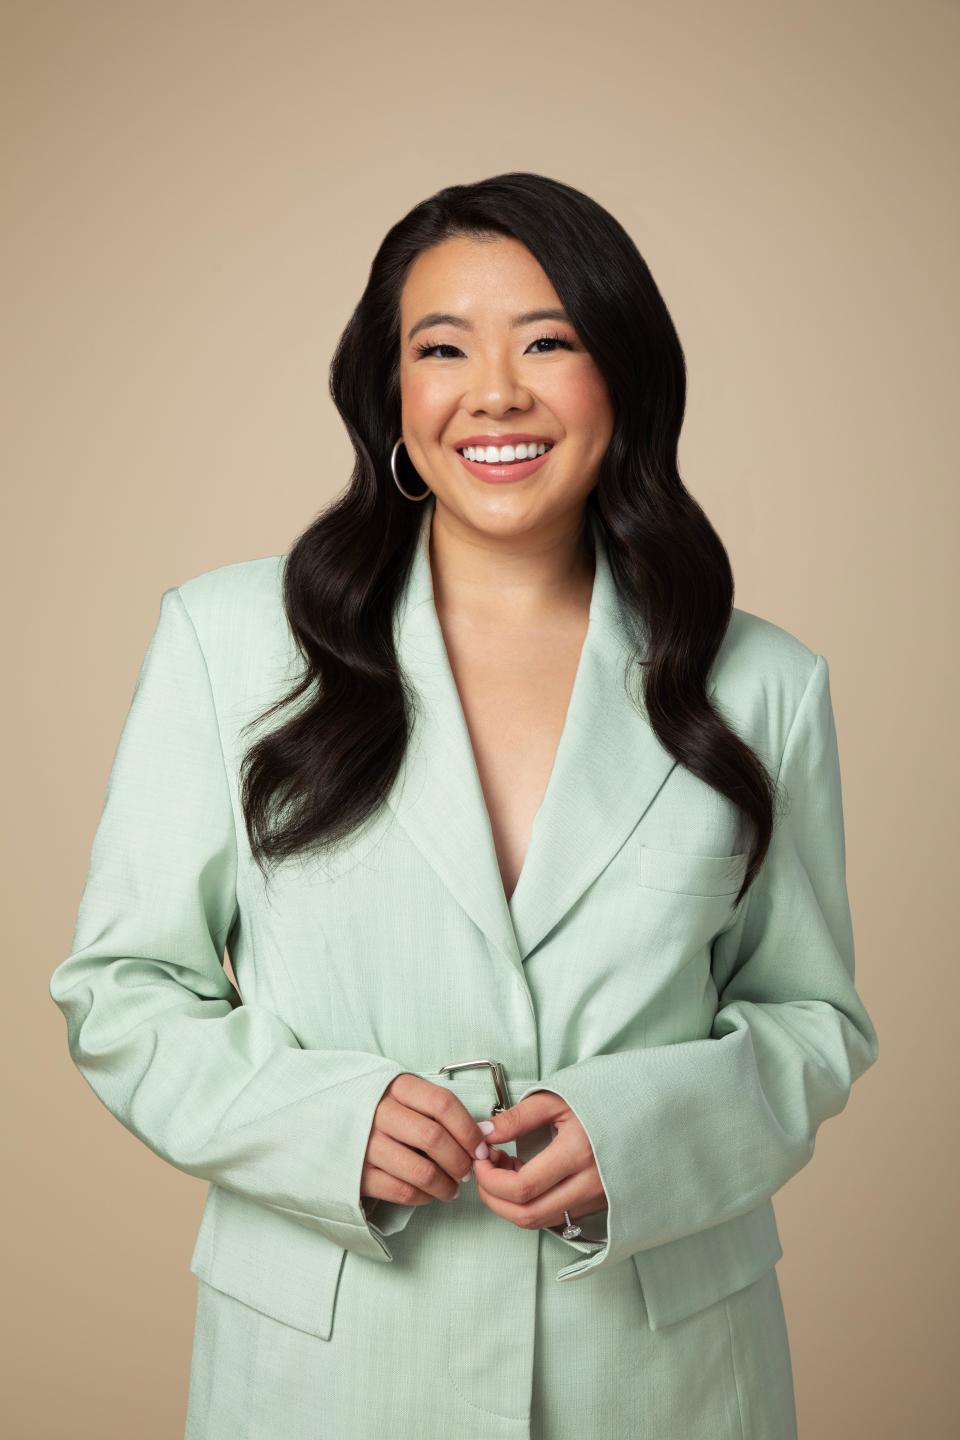 Vivian Tu, a University of Chicago graduate and former Wall Street trader, discusses personal finance on TikTok as Vivian, Your Rich BFF